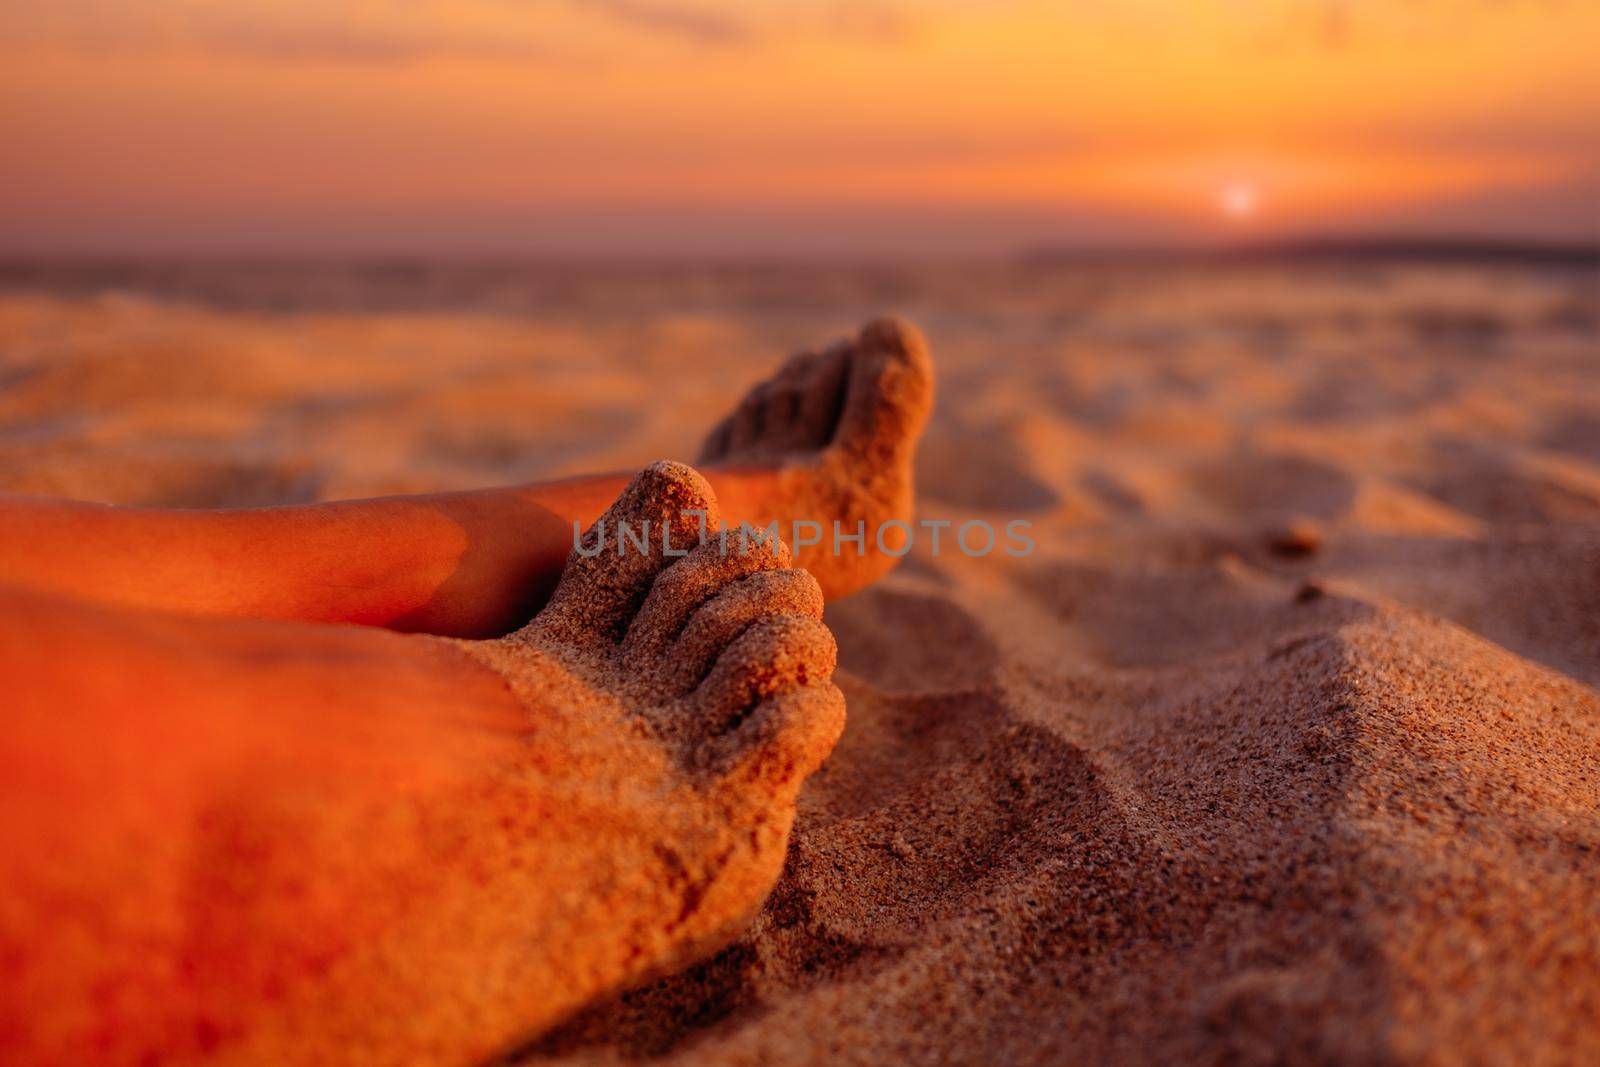 Woman resting on beach near the sea, close-up view of female barefoot legs sand at sunset.